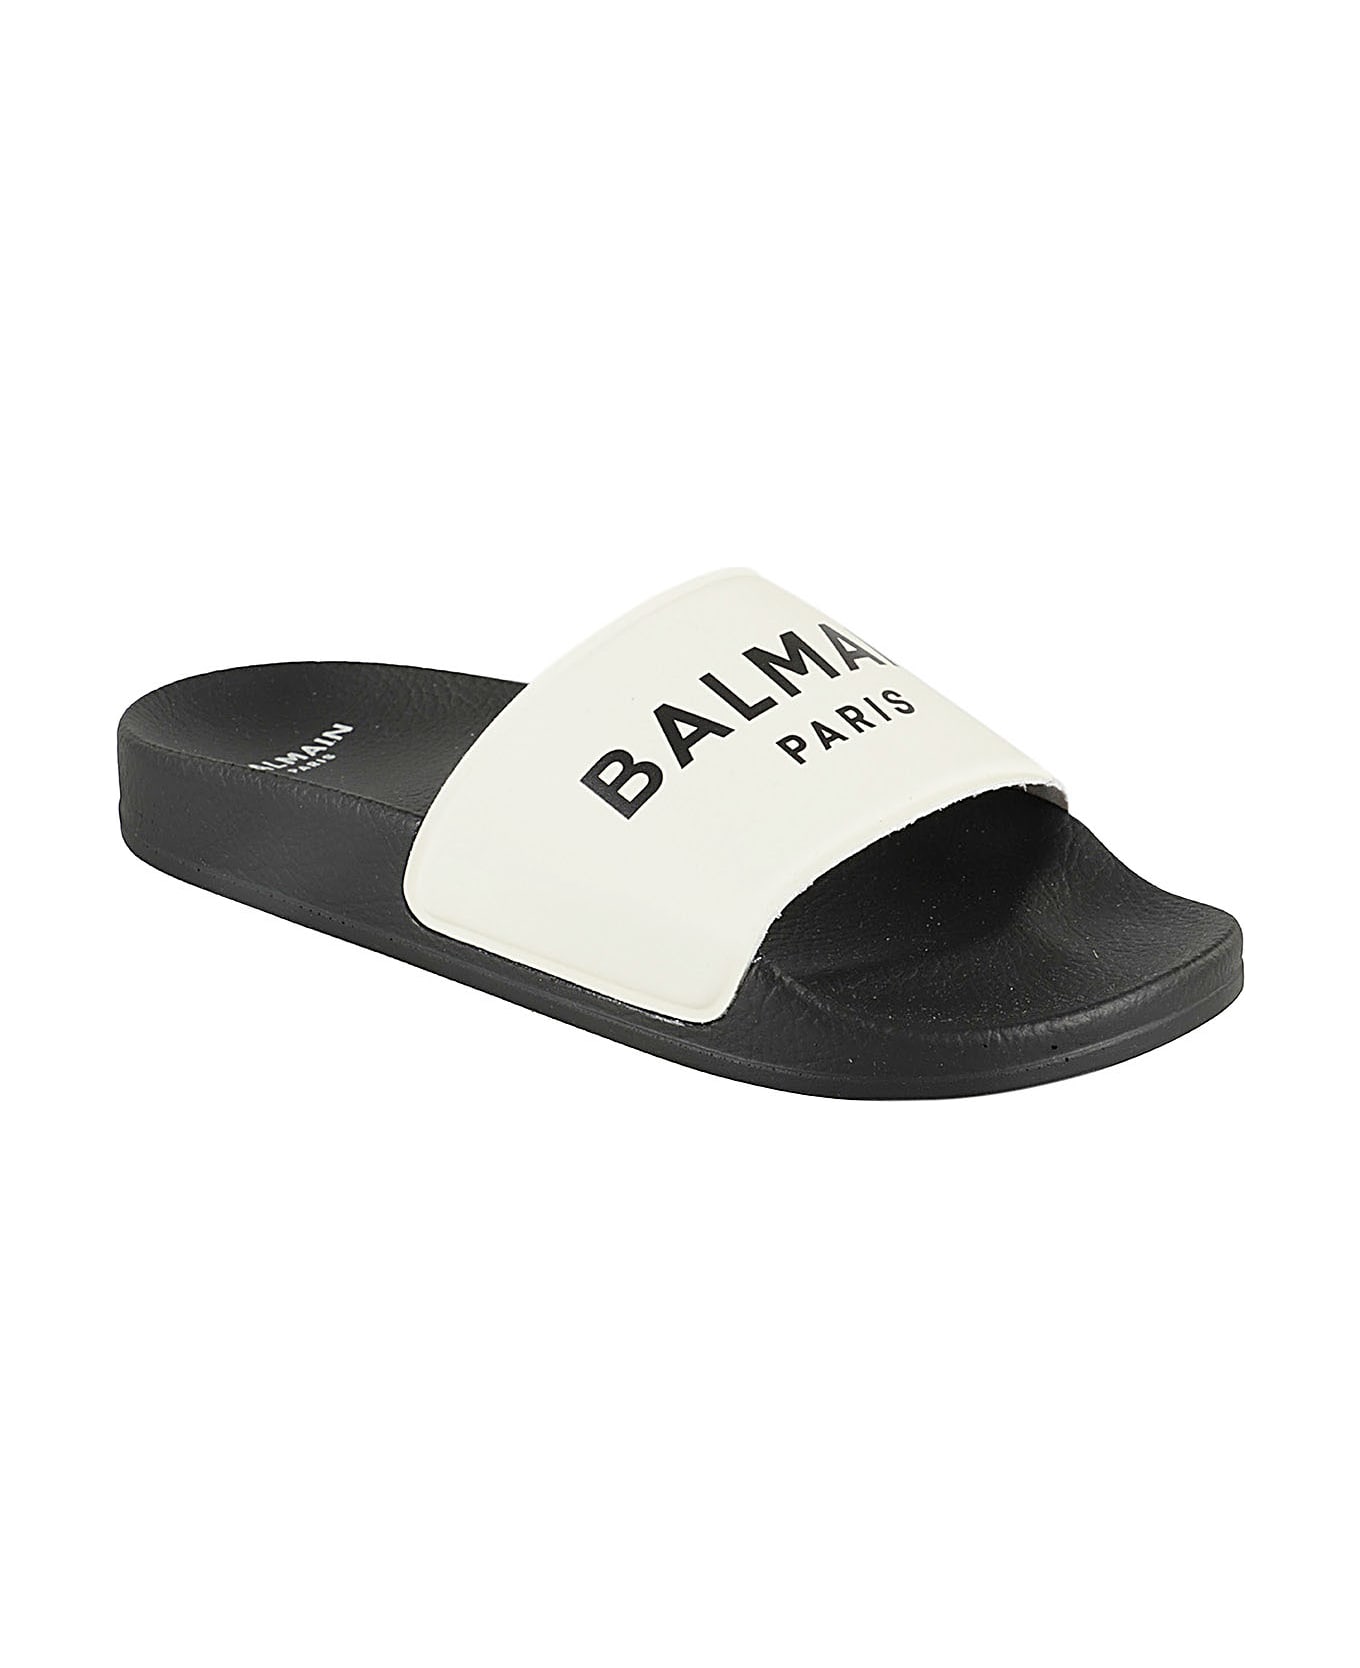 Balmain Sliders - This piece can be paired with our luna jeans and sneakers to complete the look